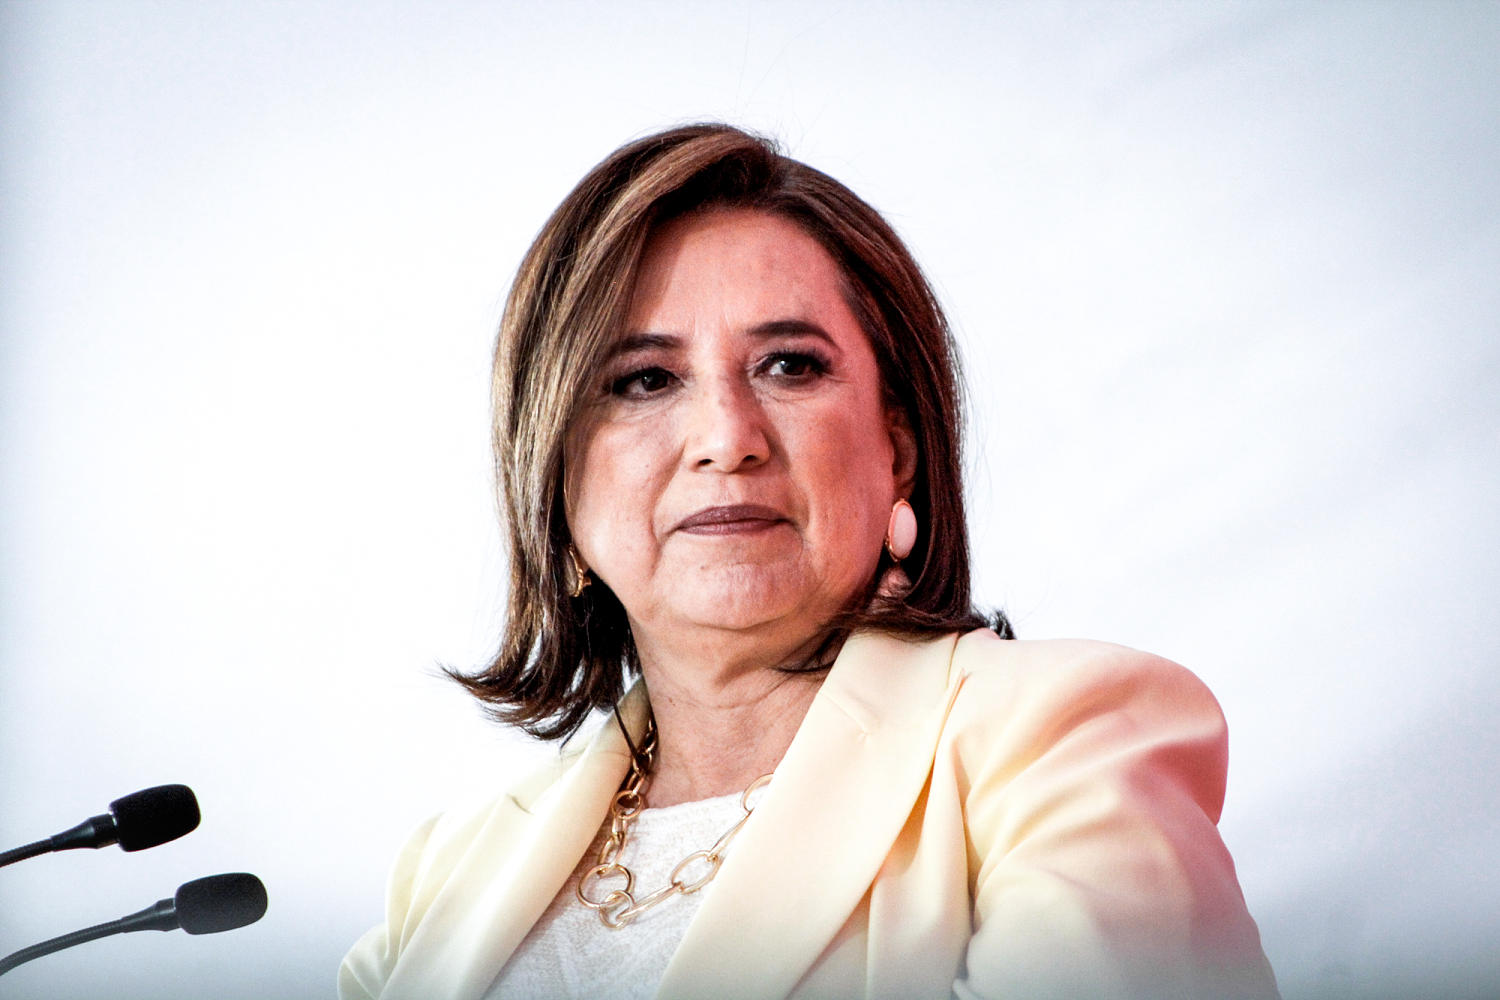 She trails the ruling party's candidate to be Mexico's president. Visiting her hometown helps show why.